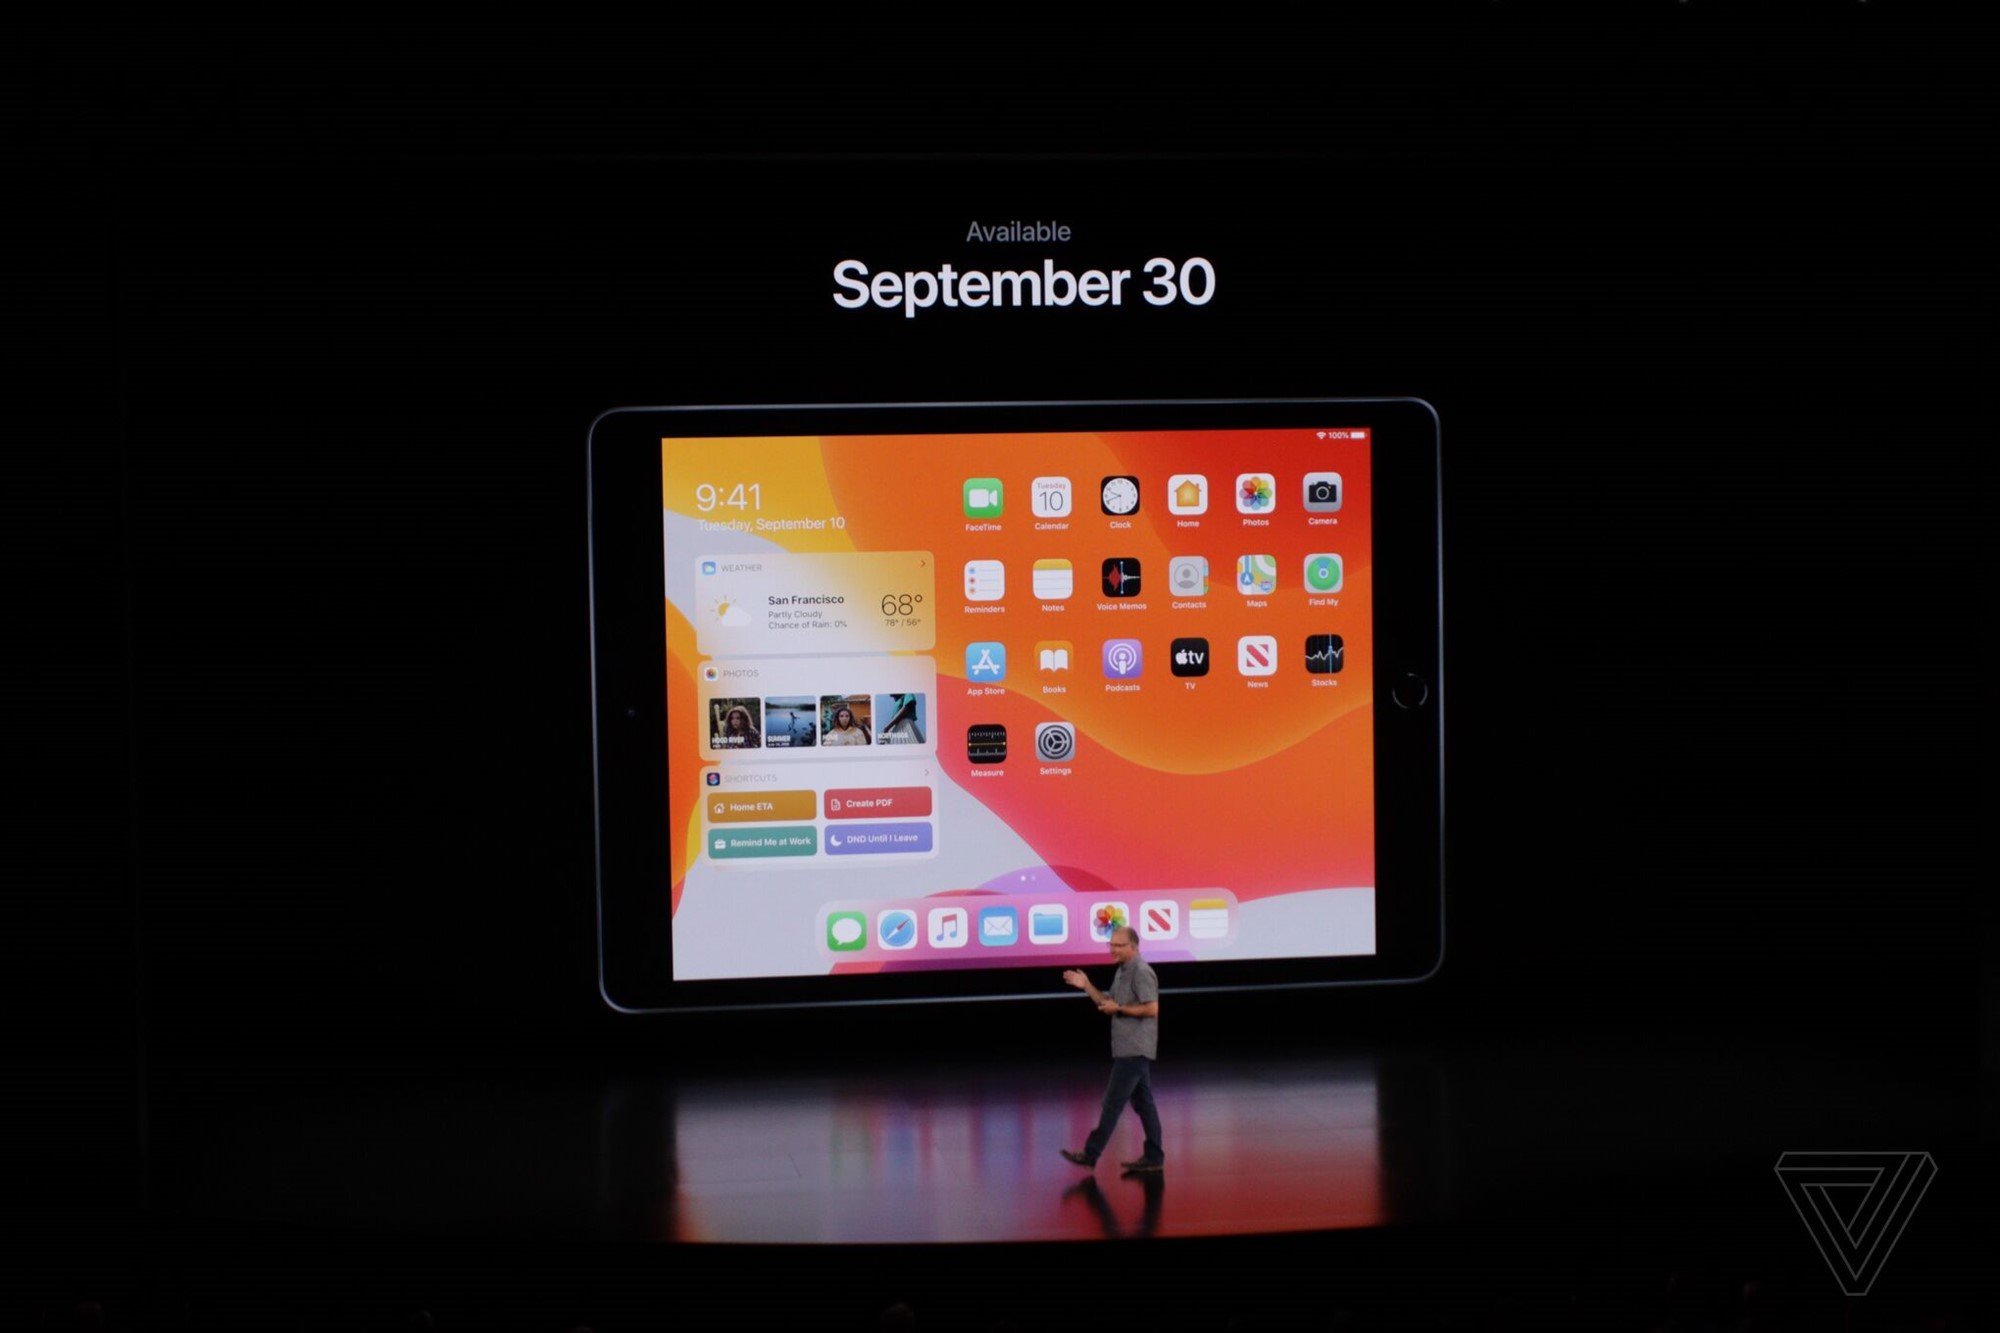 iPadOS comes out September 30th